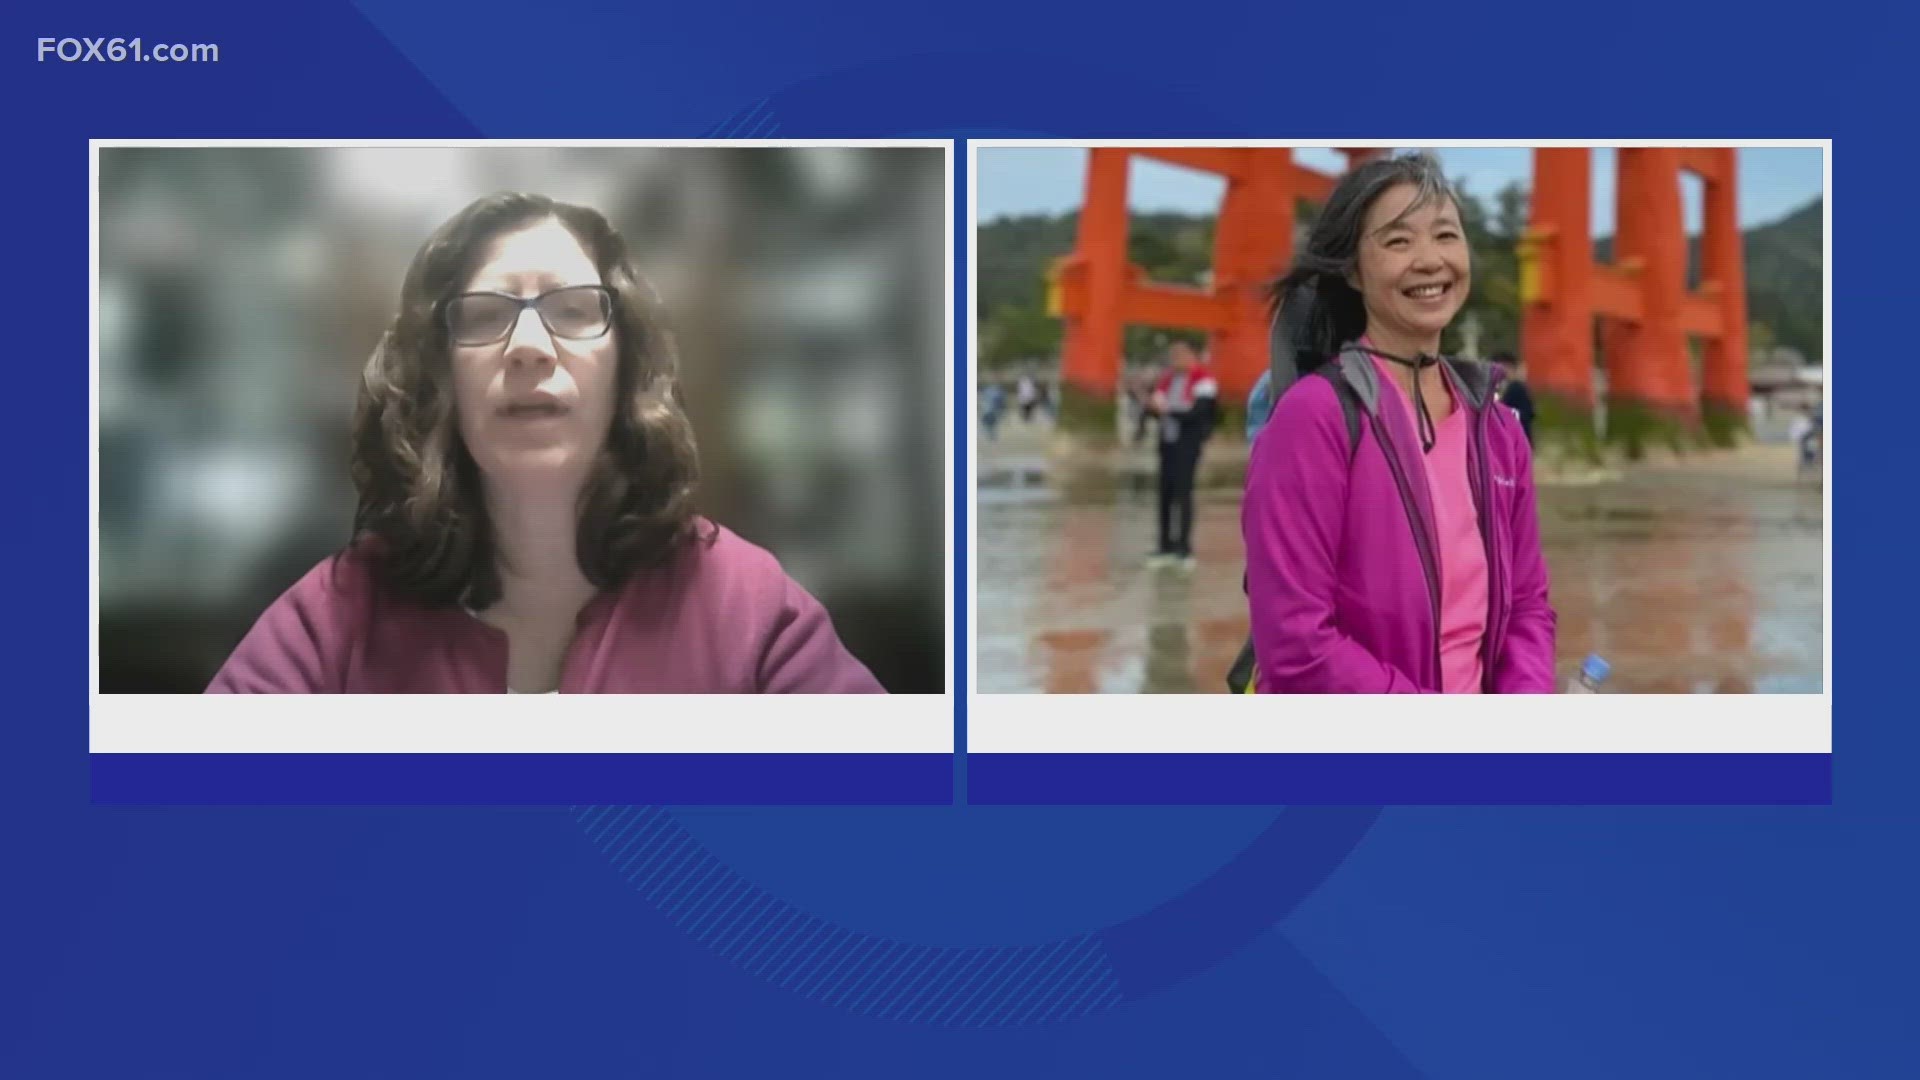 A retired Storrs woman hiking Japan’s Kumano Kodo trail earlier this month has reportedly gone missing, and her family has launched a desperate search to find her.